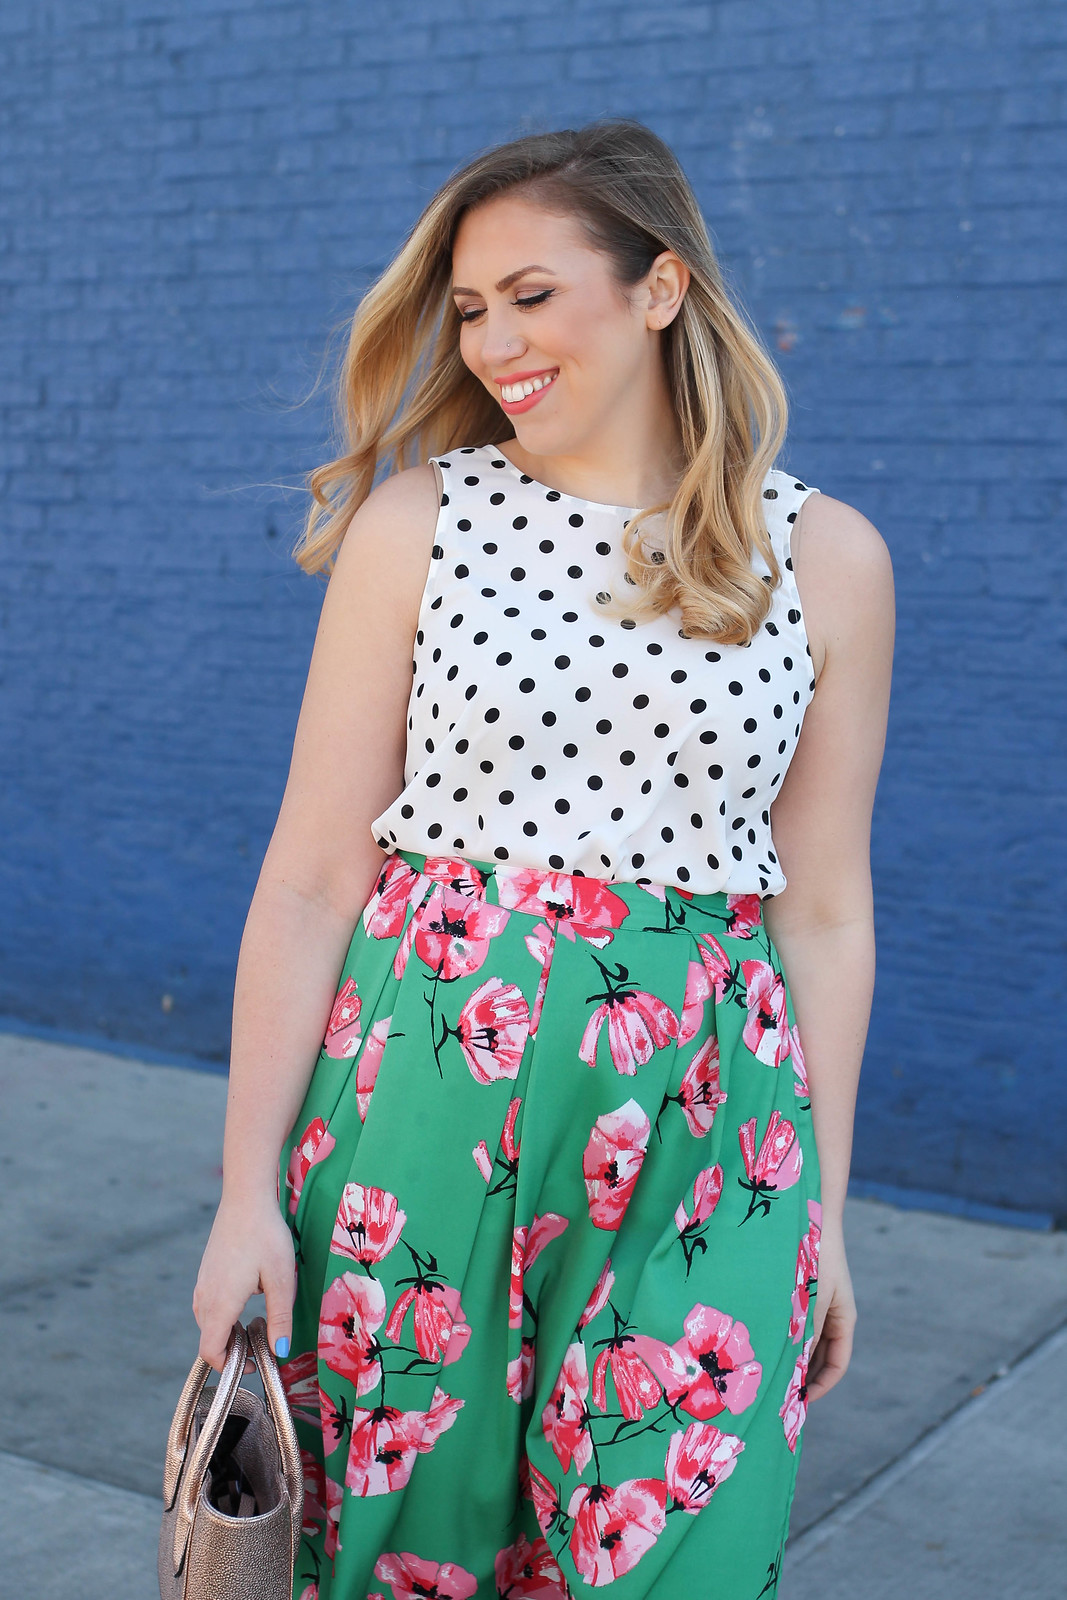 Colorful Spring Outfit Polka Dot Tank Green Pink Floral Midi Skirt Blue Brick Wall Jackie Giardina Living After Midnite Fashion Style Blogger